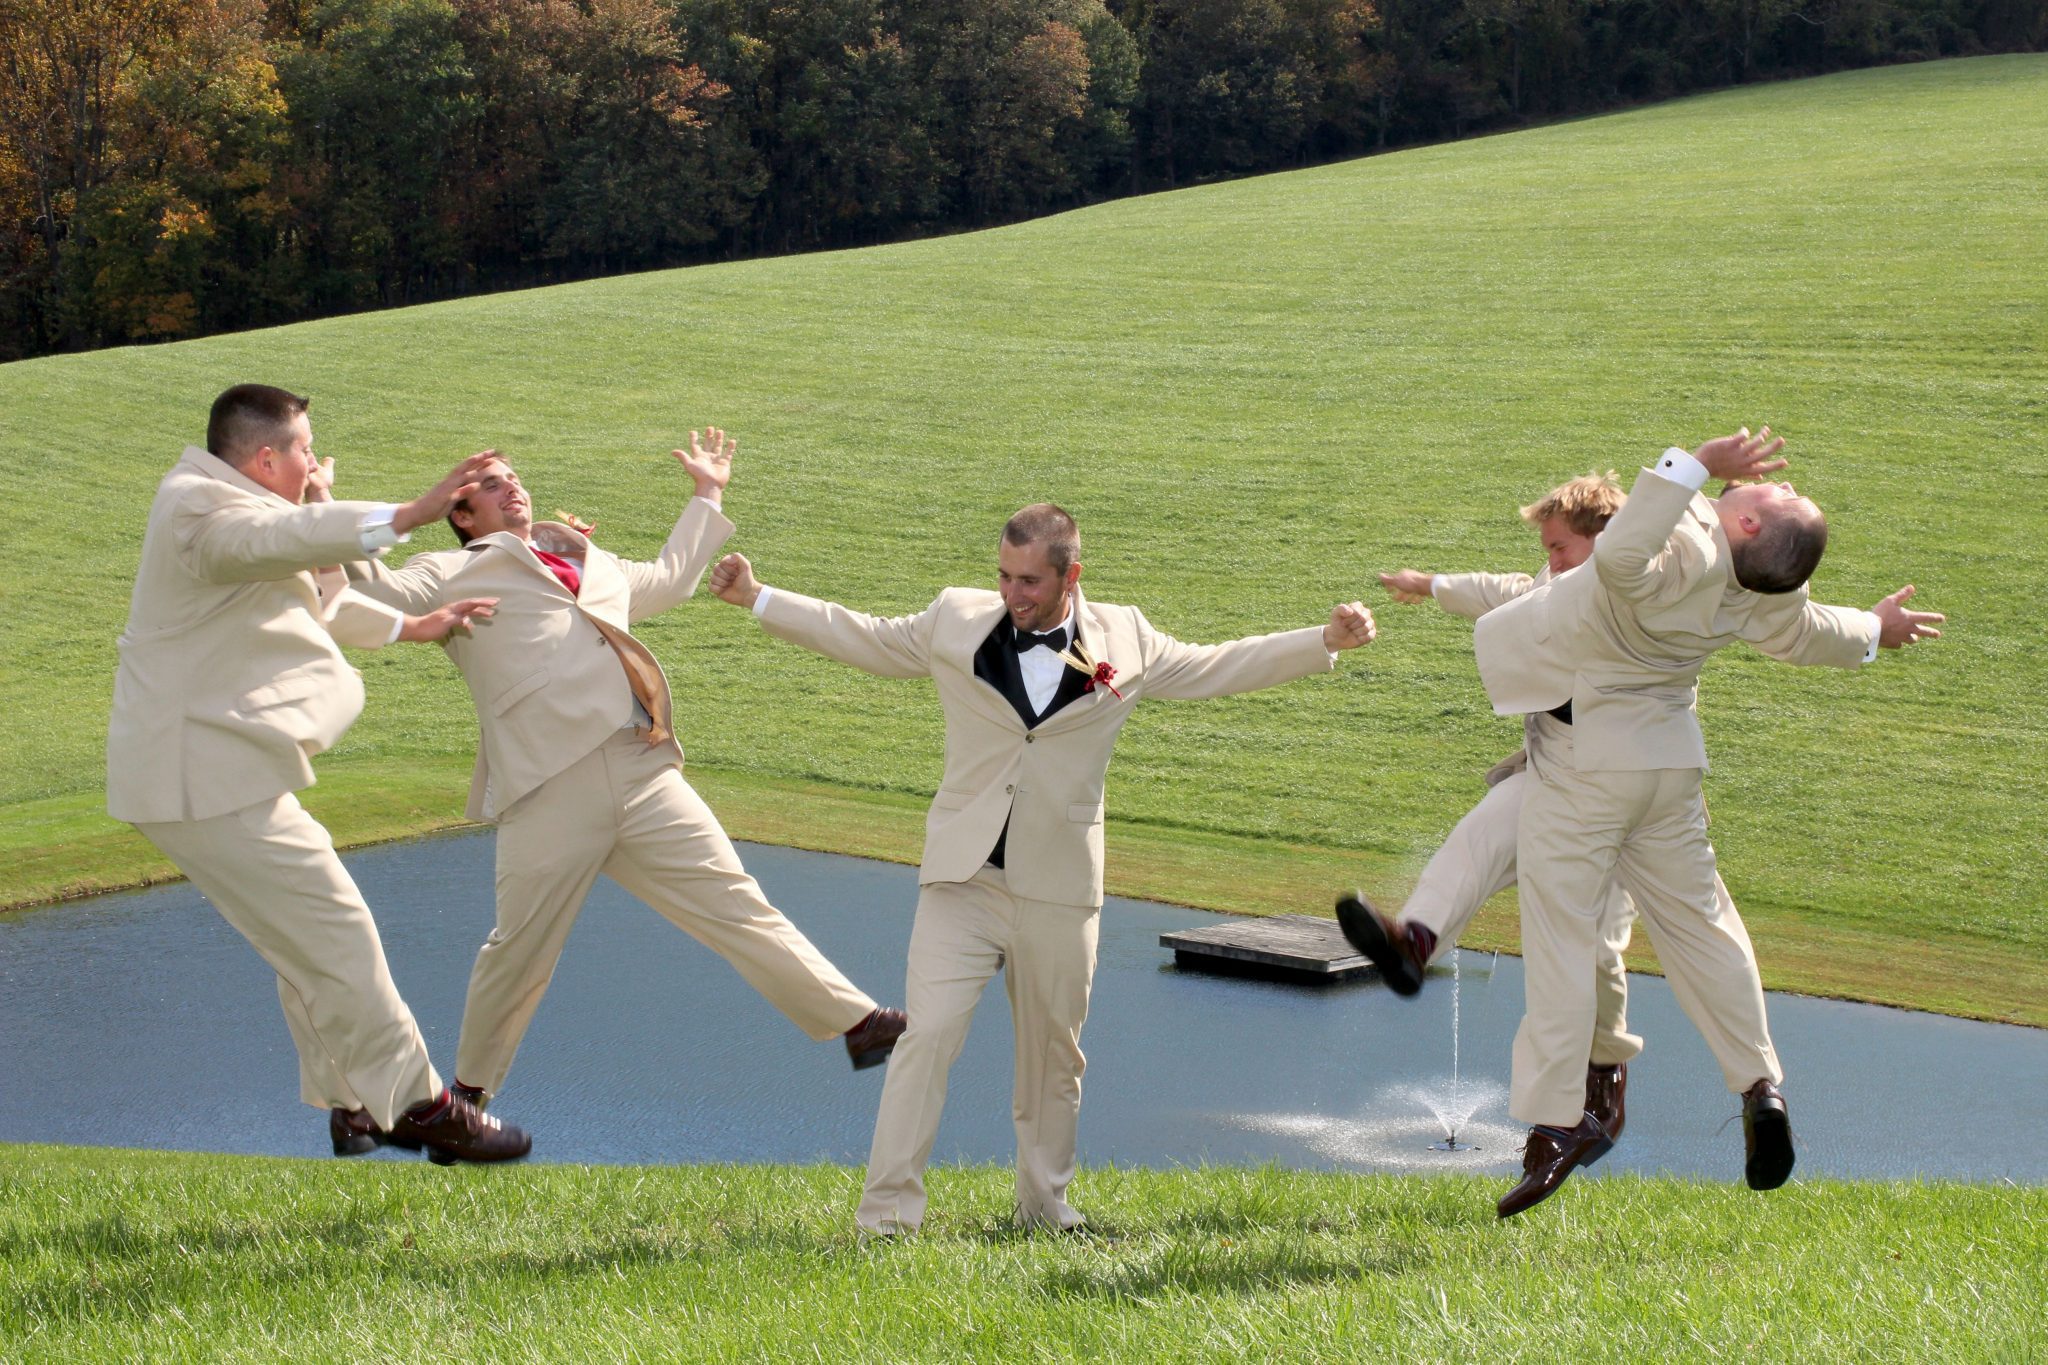 Groomsmen pose by pond on back lawn of private estate near Hagerstown Maryland